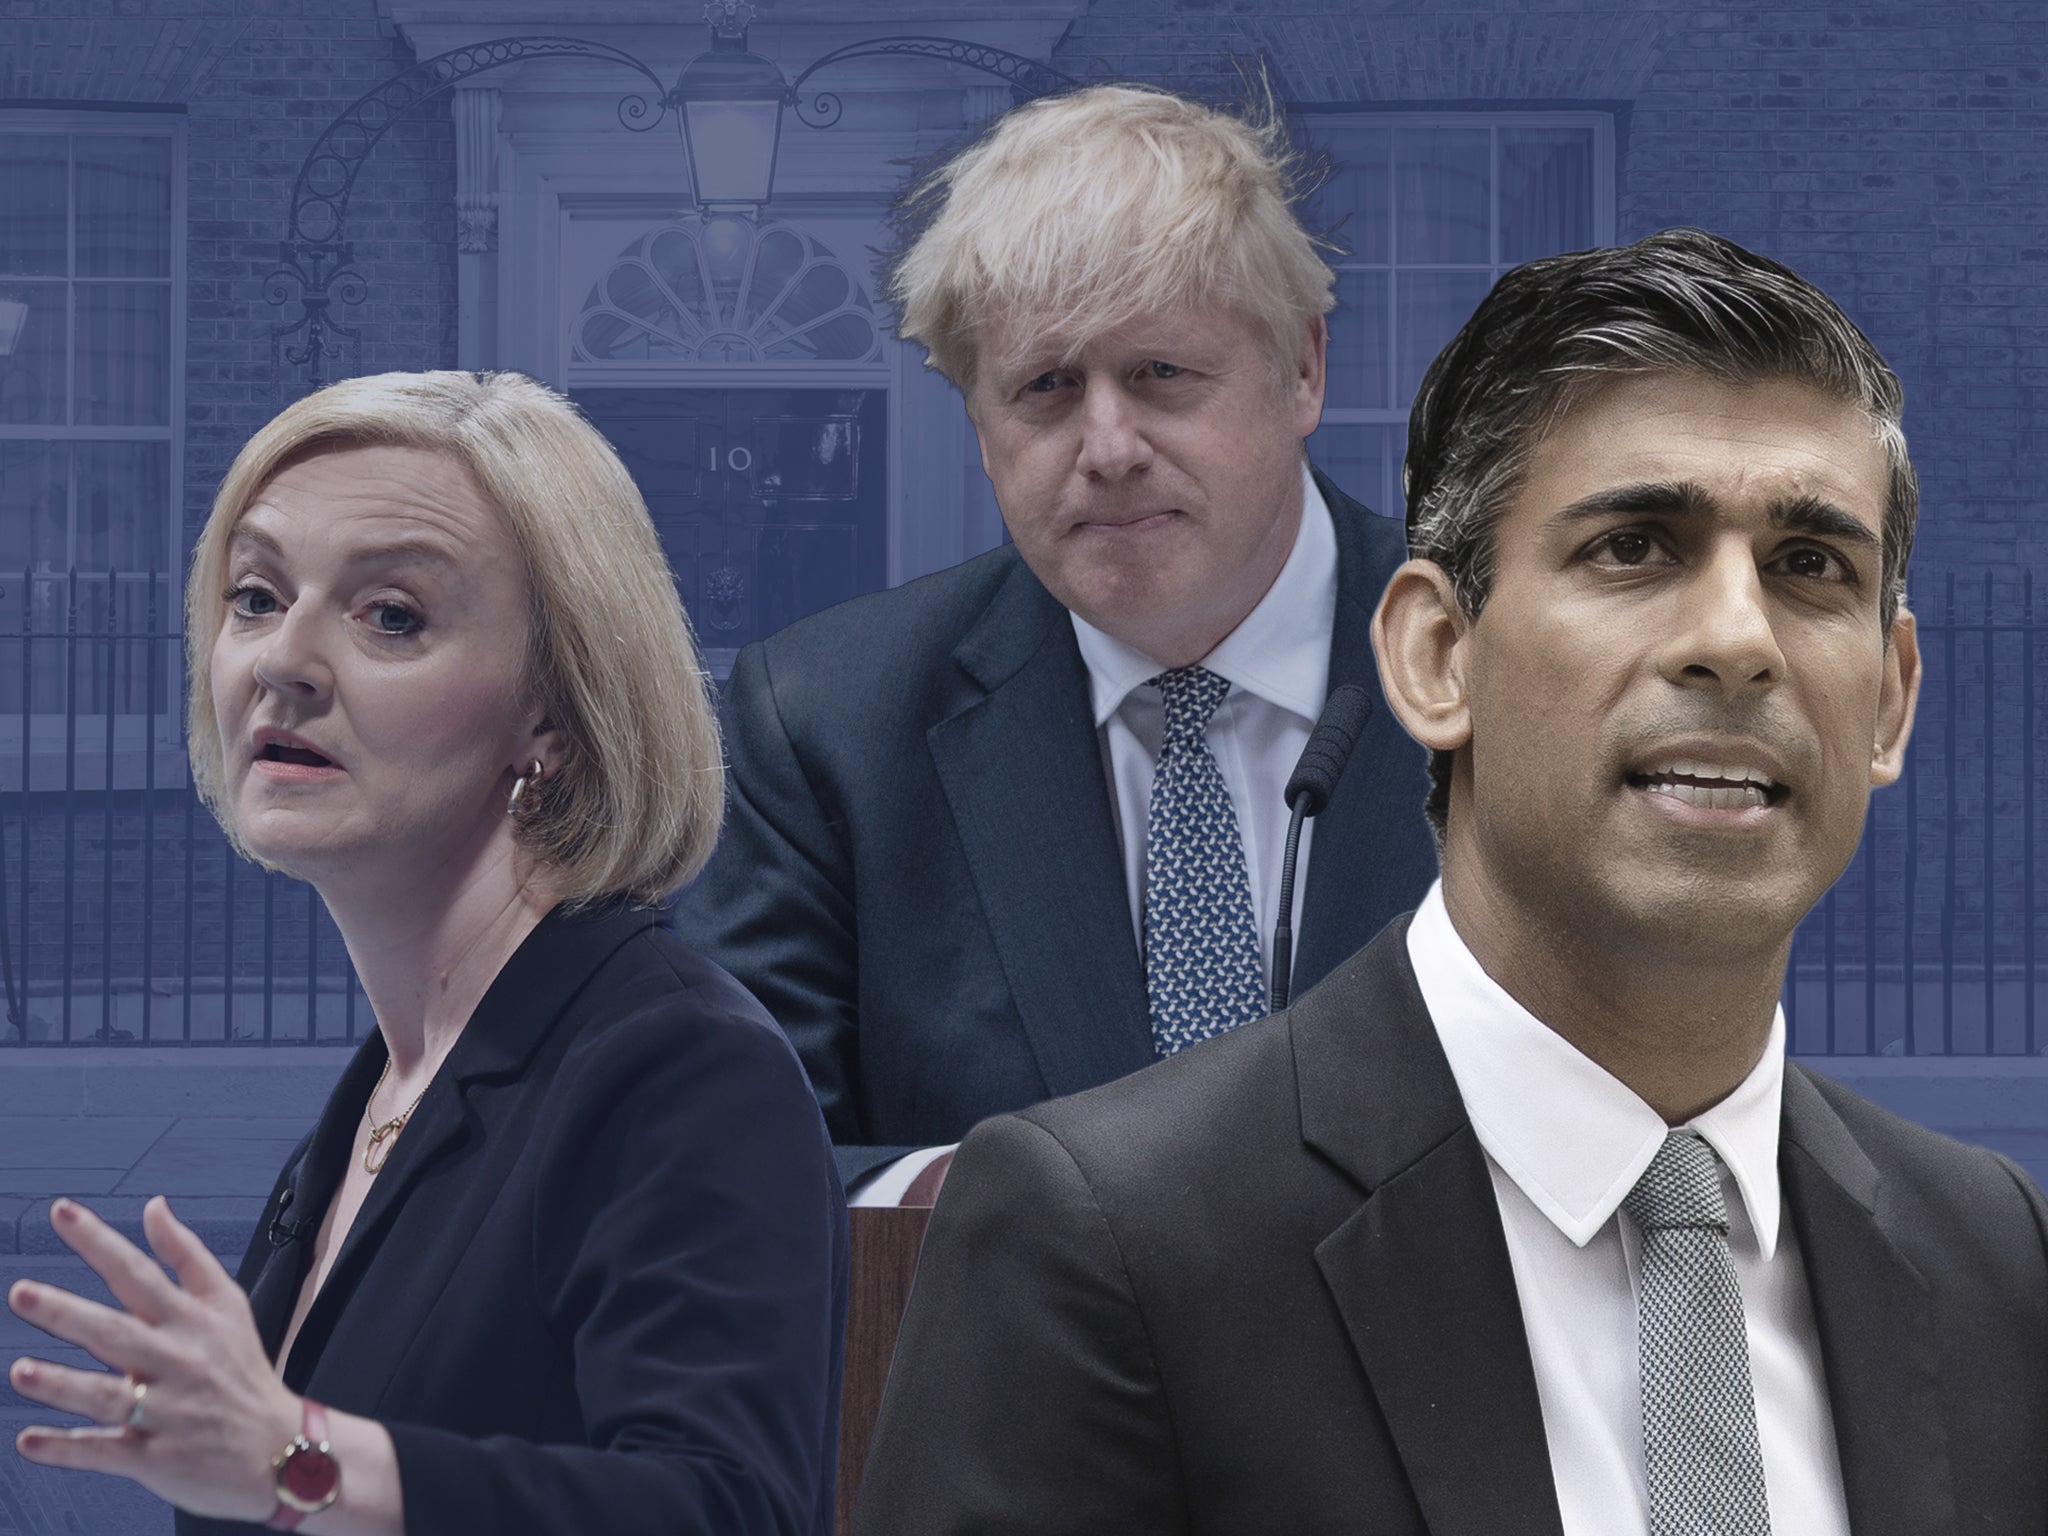 Sunak knows that a full-frontal attack on Johnson or Truss would see their allies return fire